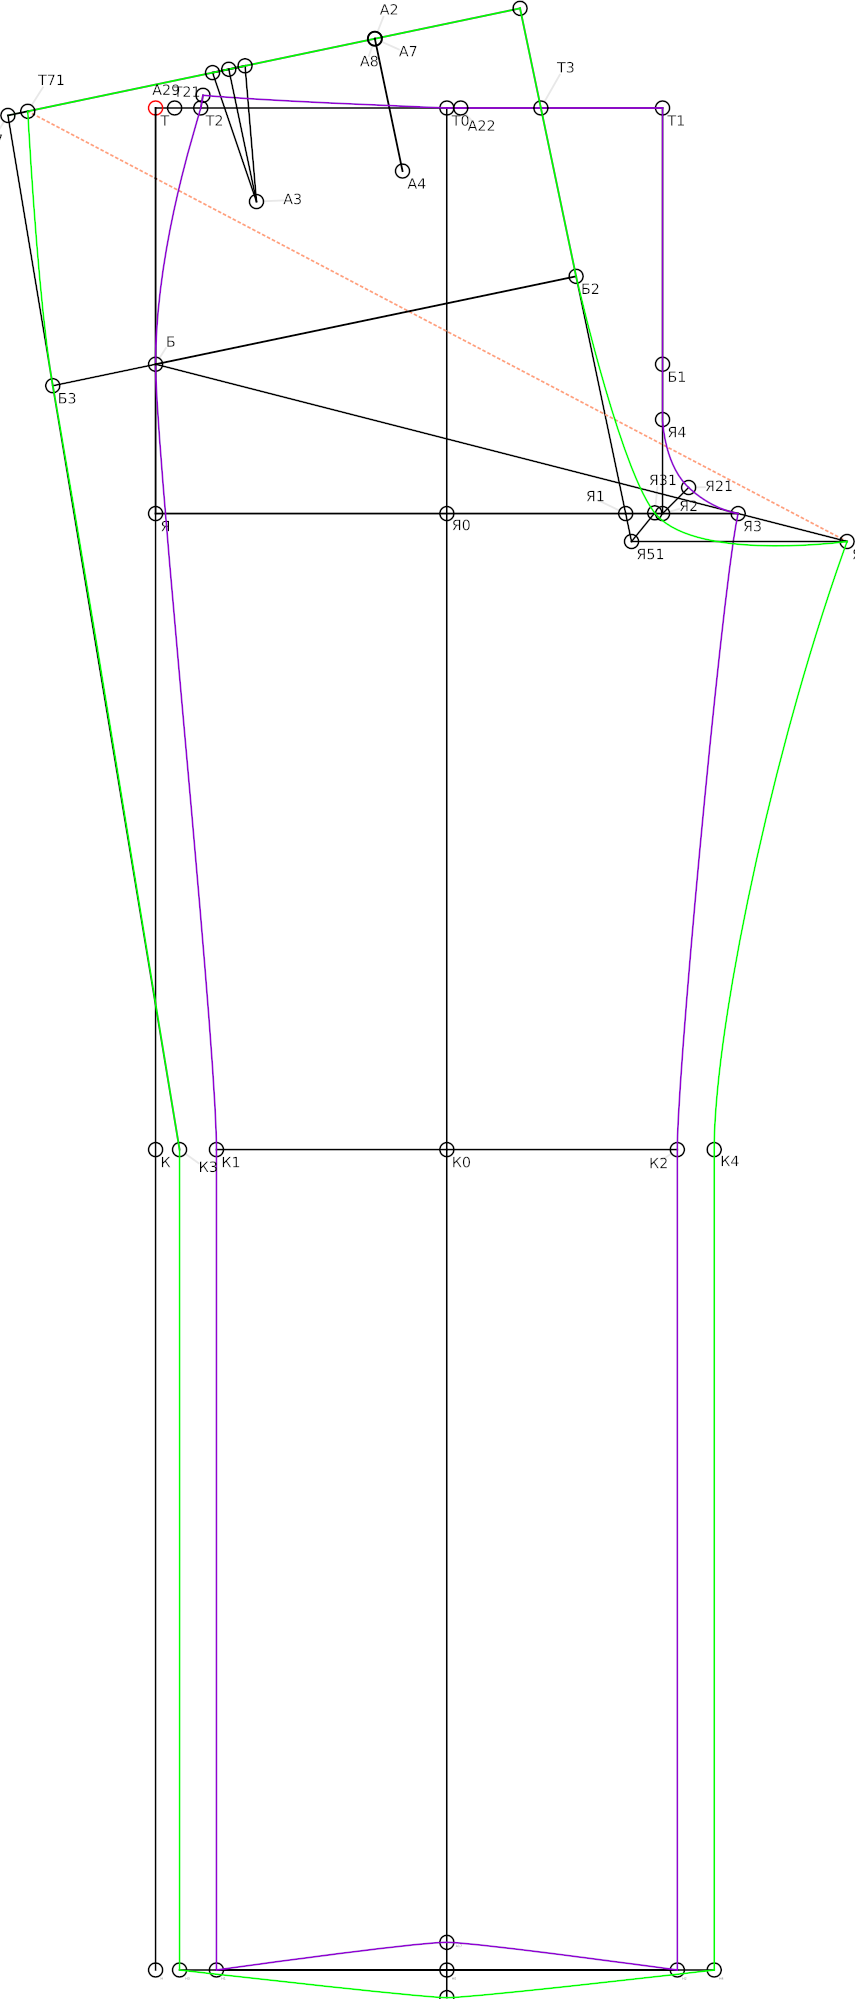 Basic trouser base for a notionally proportioned figure using the M.L. Voronin method (russian language)